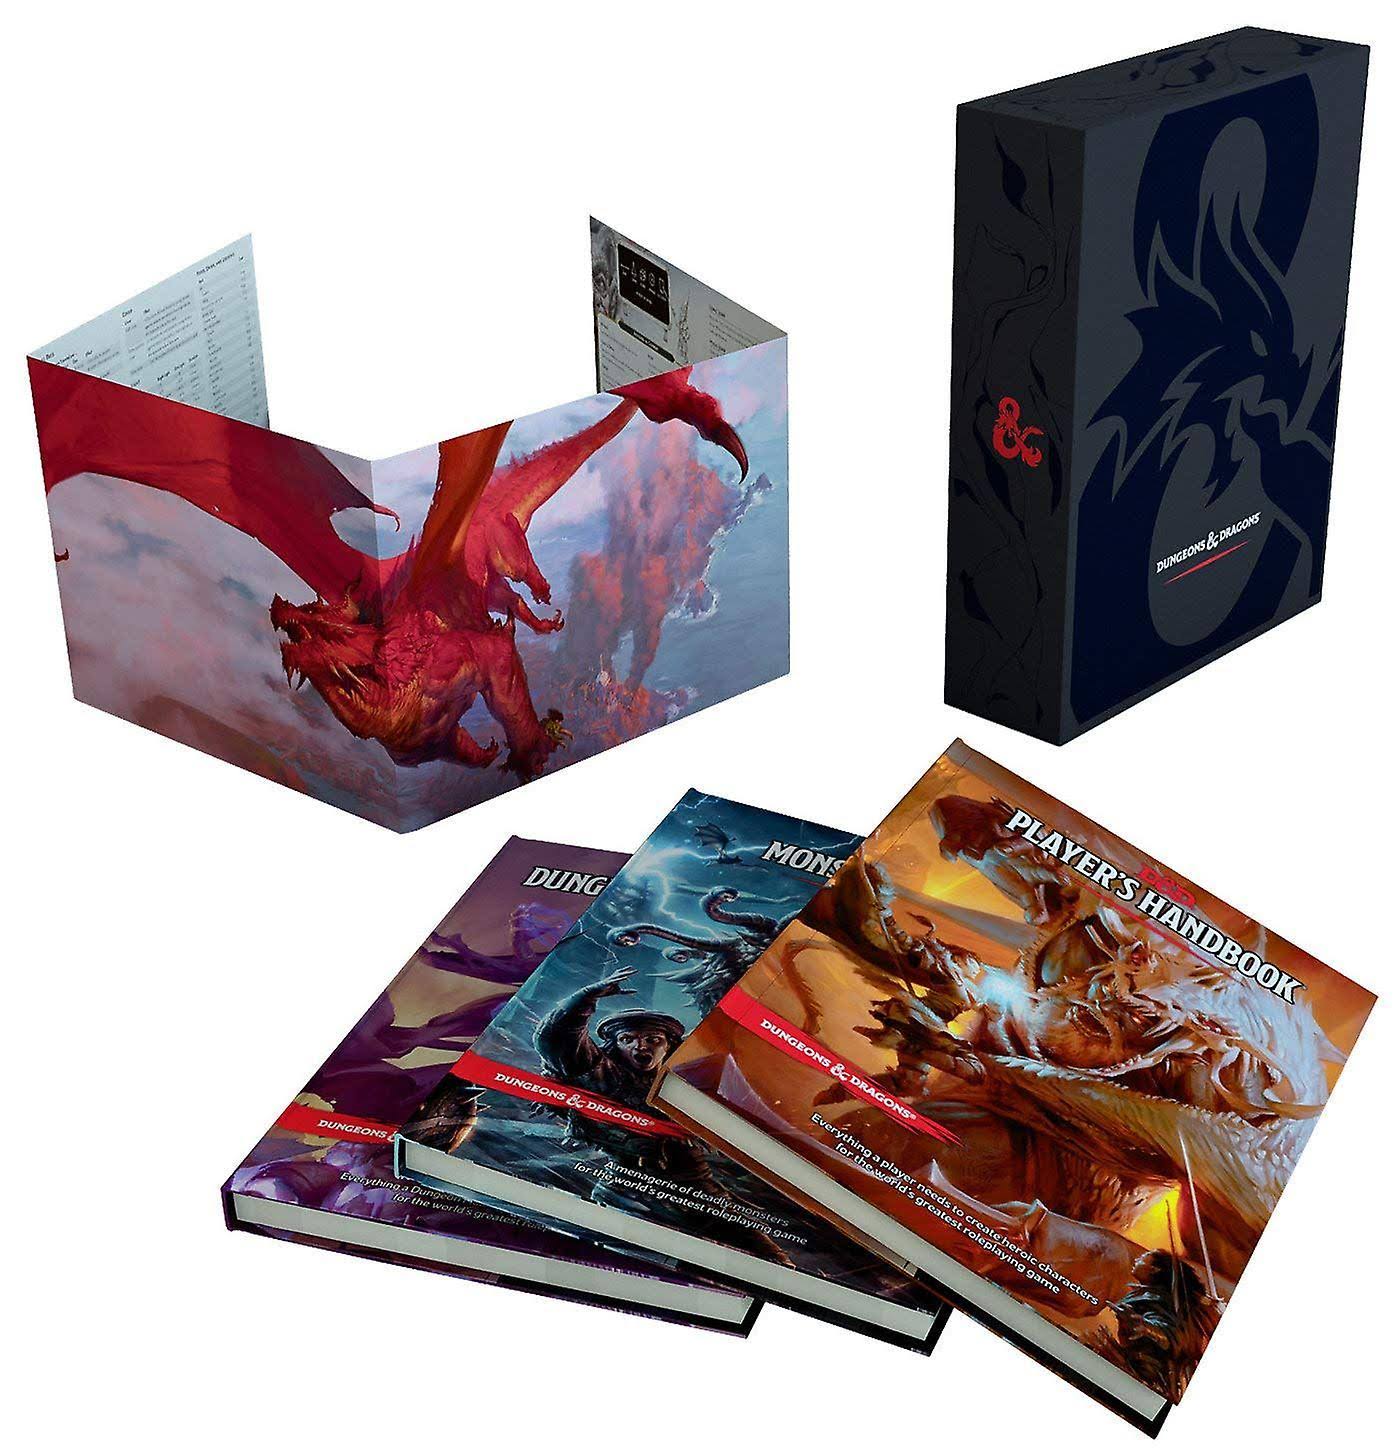 Dungeons & Dragons Core Rulebooks Gift Set (Special Foil Covers Edition with Slipcase, Player's Handbook, Dungeon Master's Guide, Monster Manual, DM Screen) [Book]